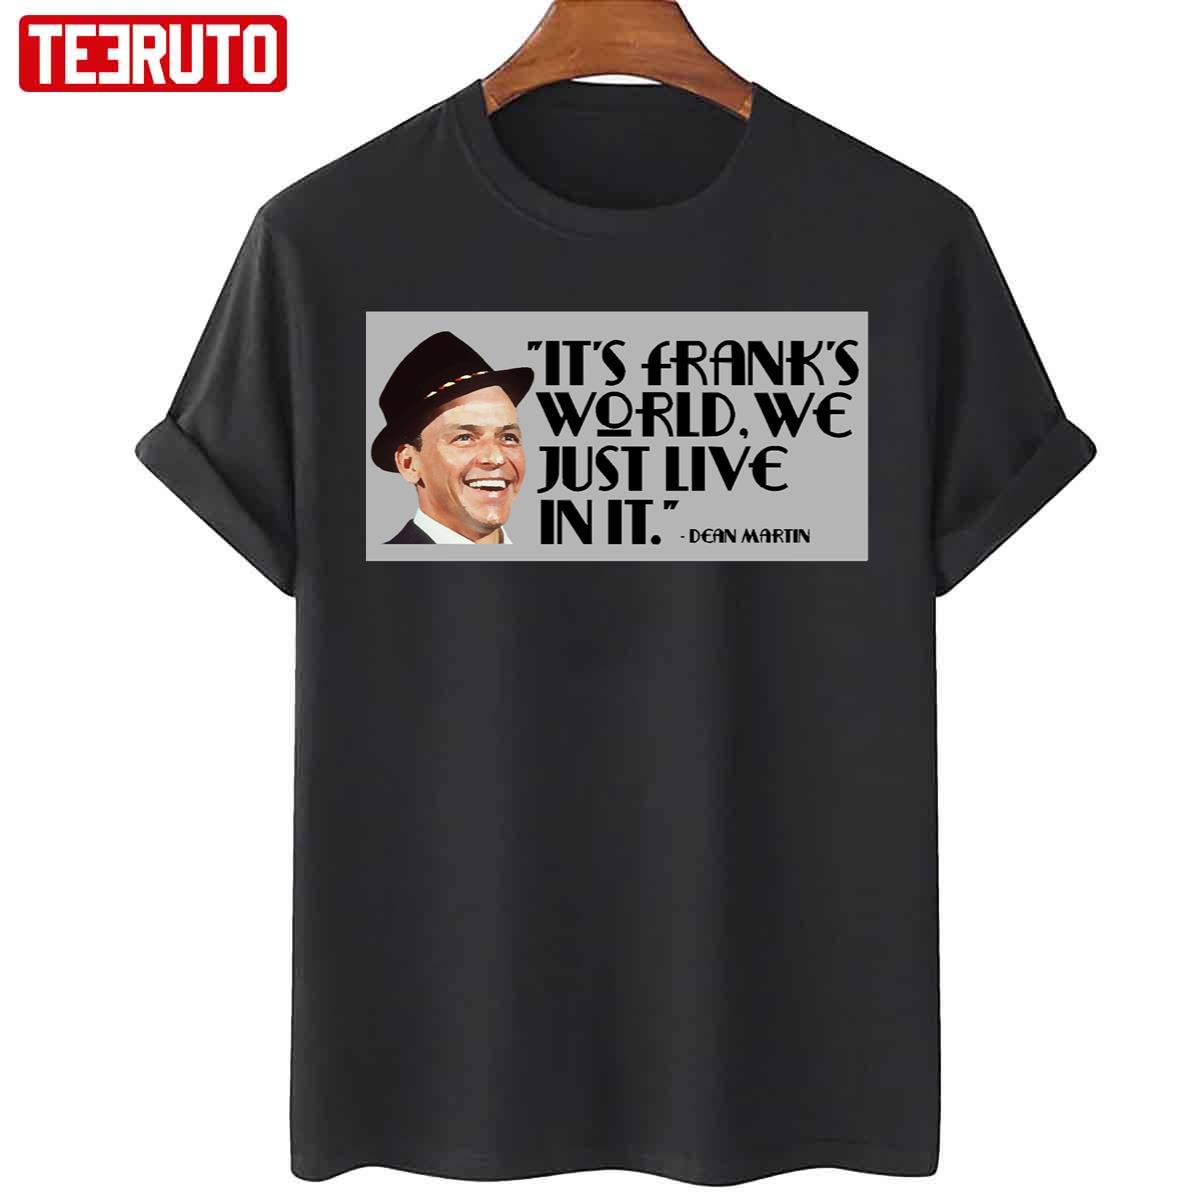 Dean Martin Quote About Frank Sinatra Unisex T-Shirt